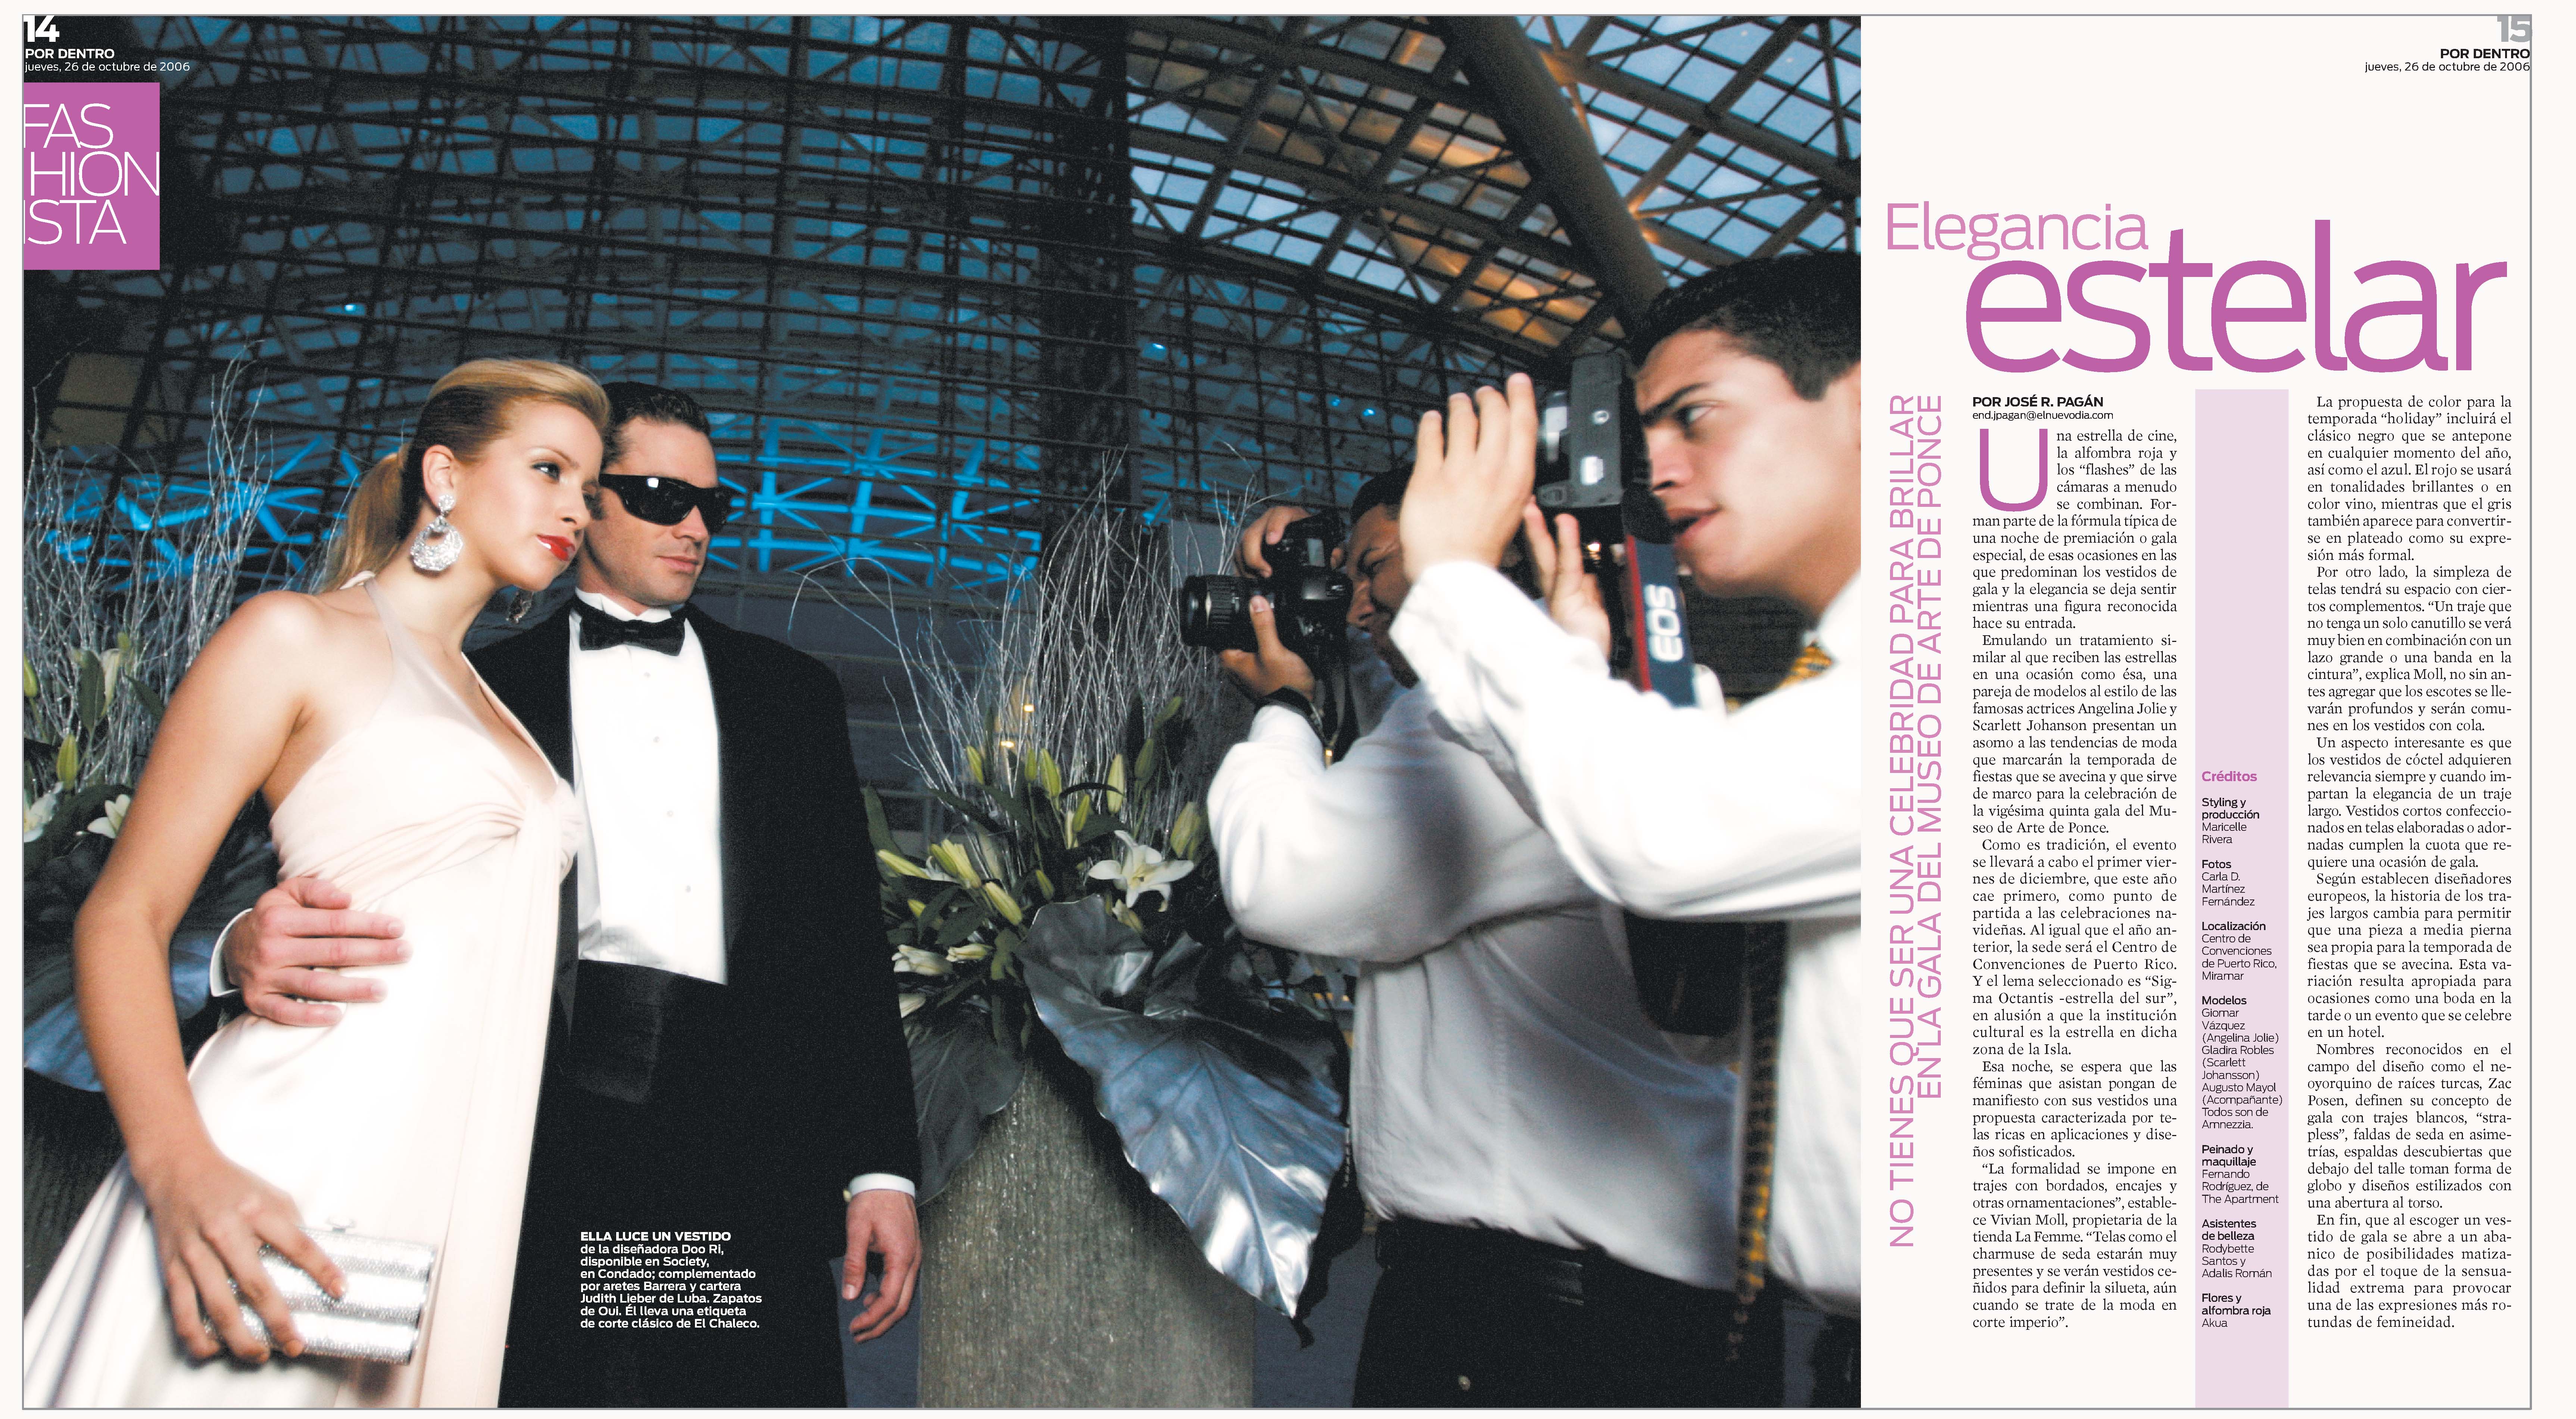 Two fashion photographers shot Gladira Robles & Augusto Mayol, in the Puerto Rico Convention Center.